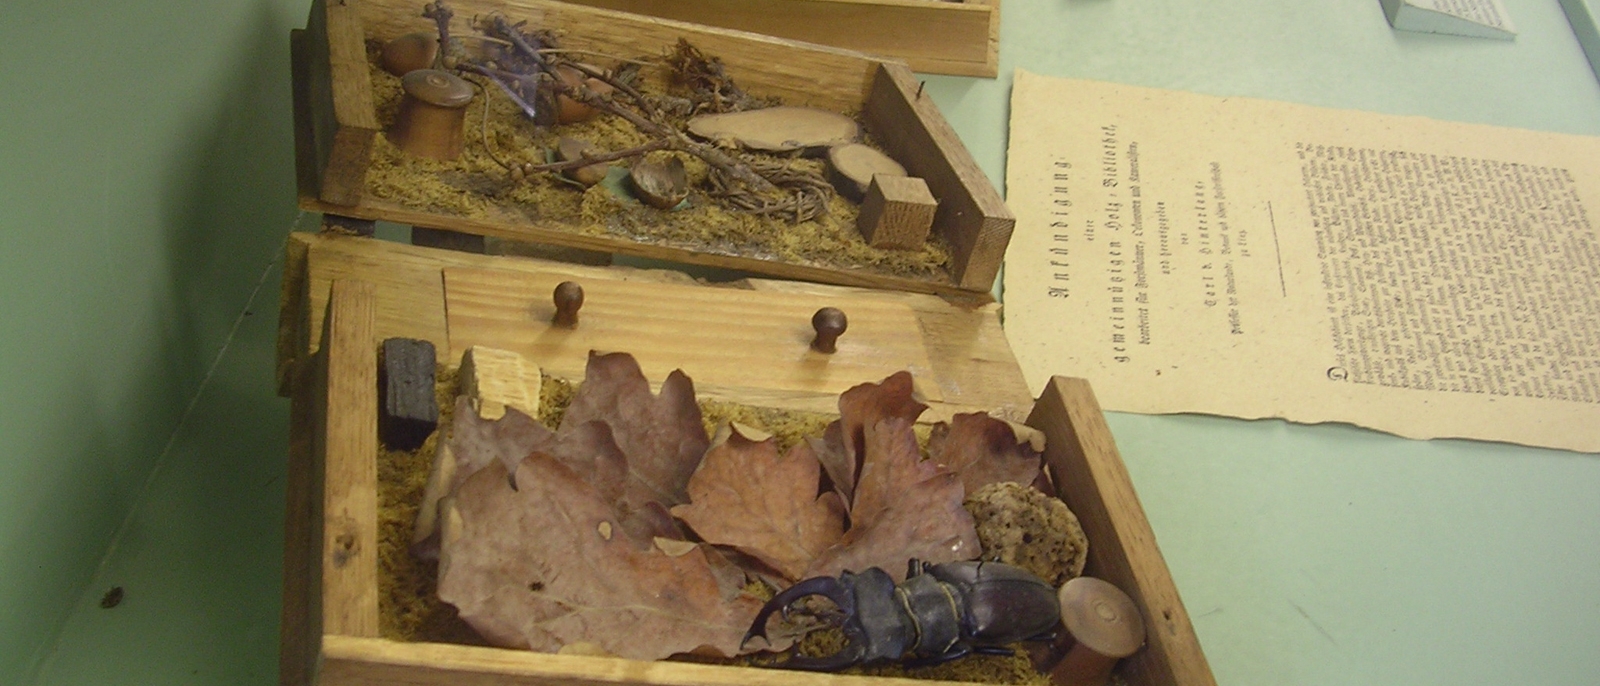 leaves and beetle in a box at a museum display